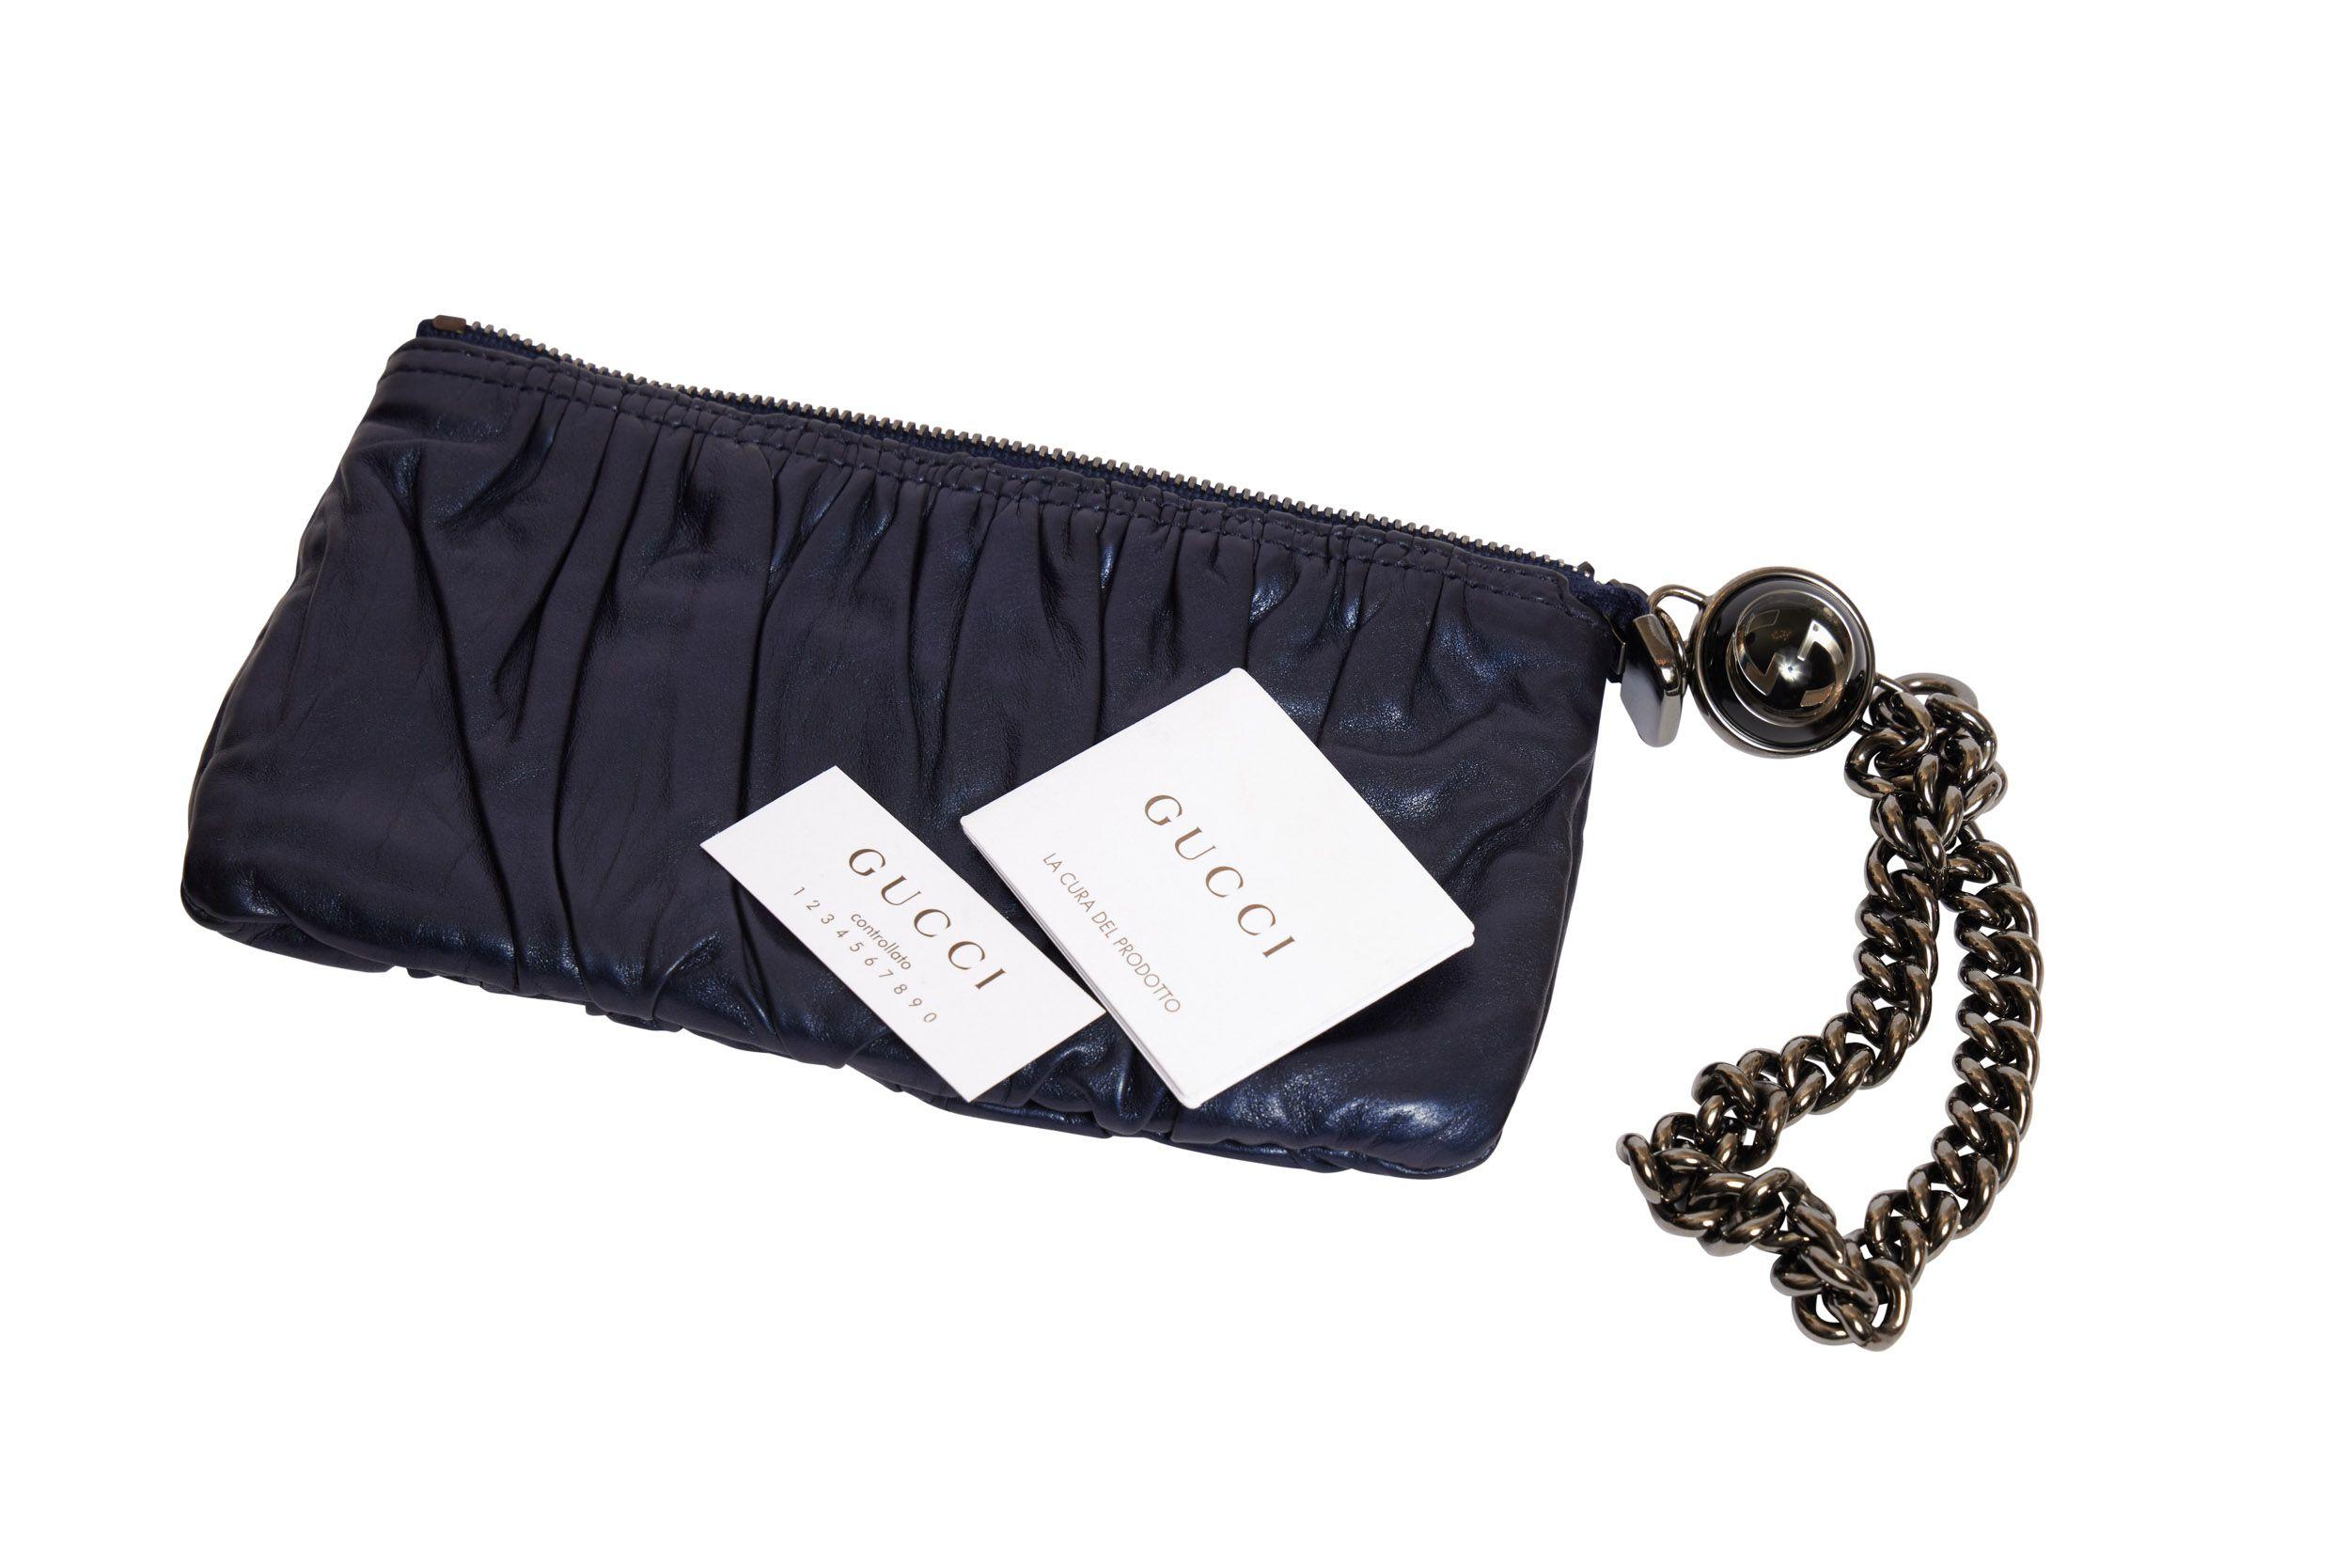 Gucci Preloved Blue Leather Wristlet In Excellent Condition For Sale In West Hollywood, CA